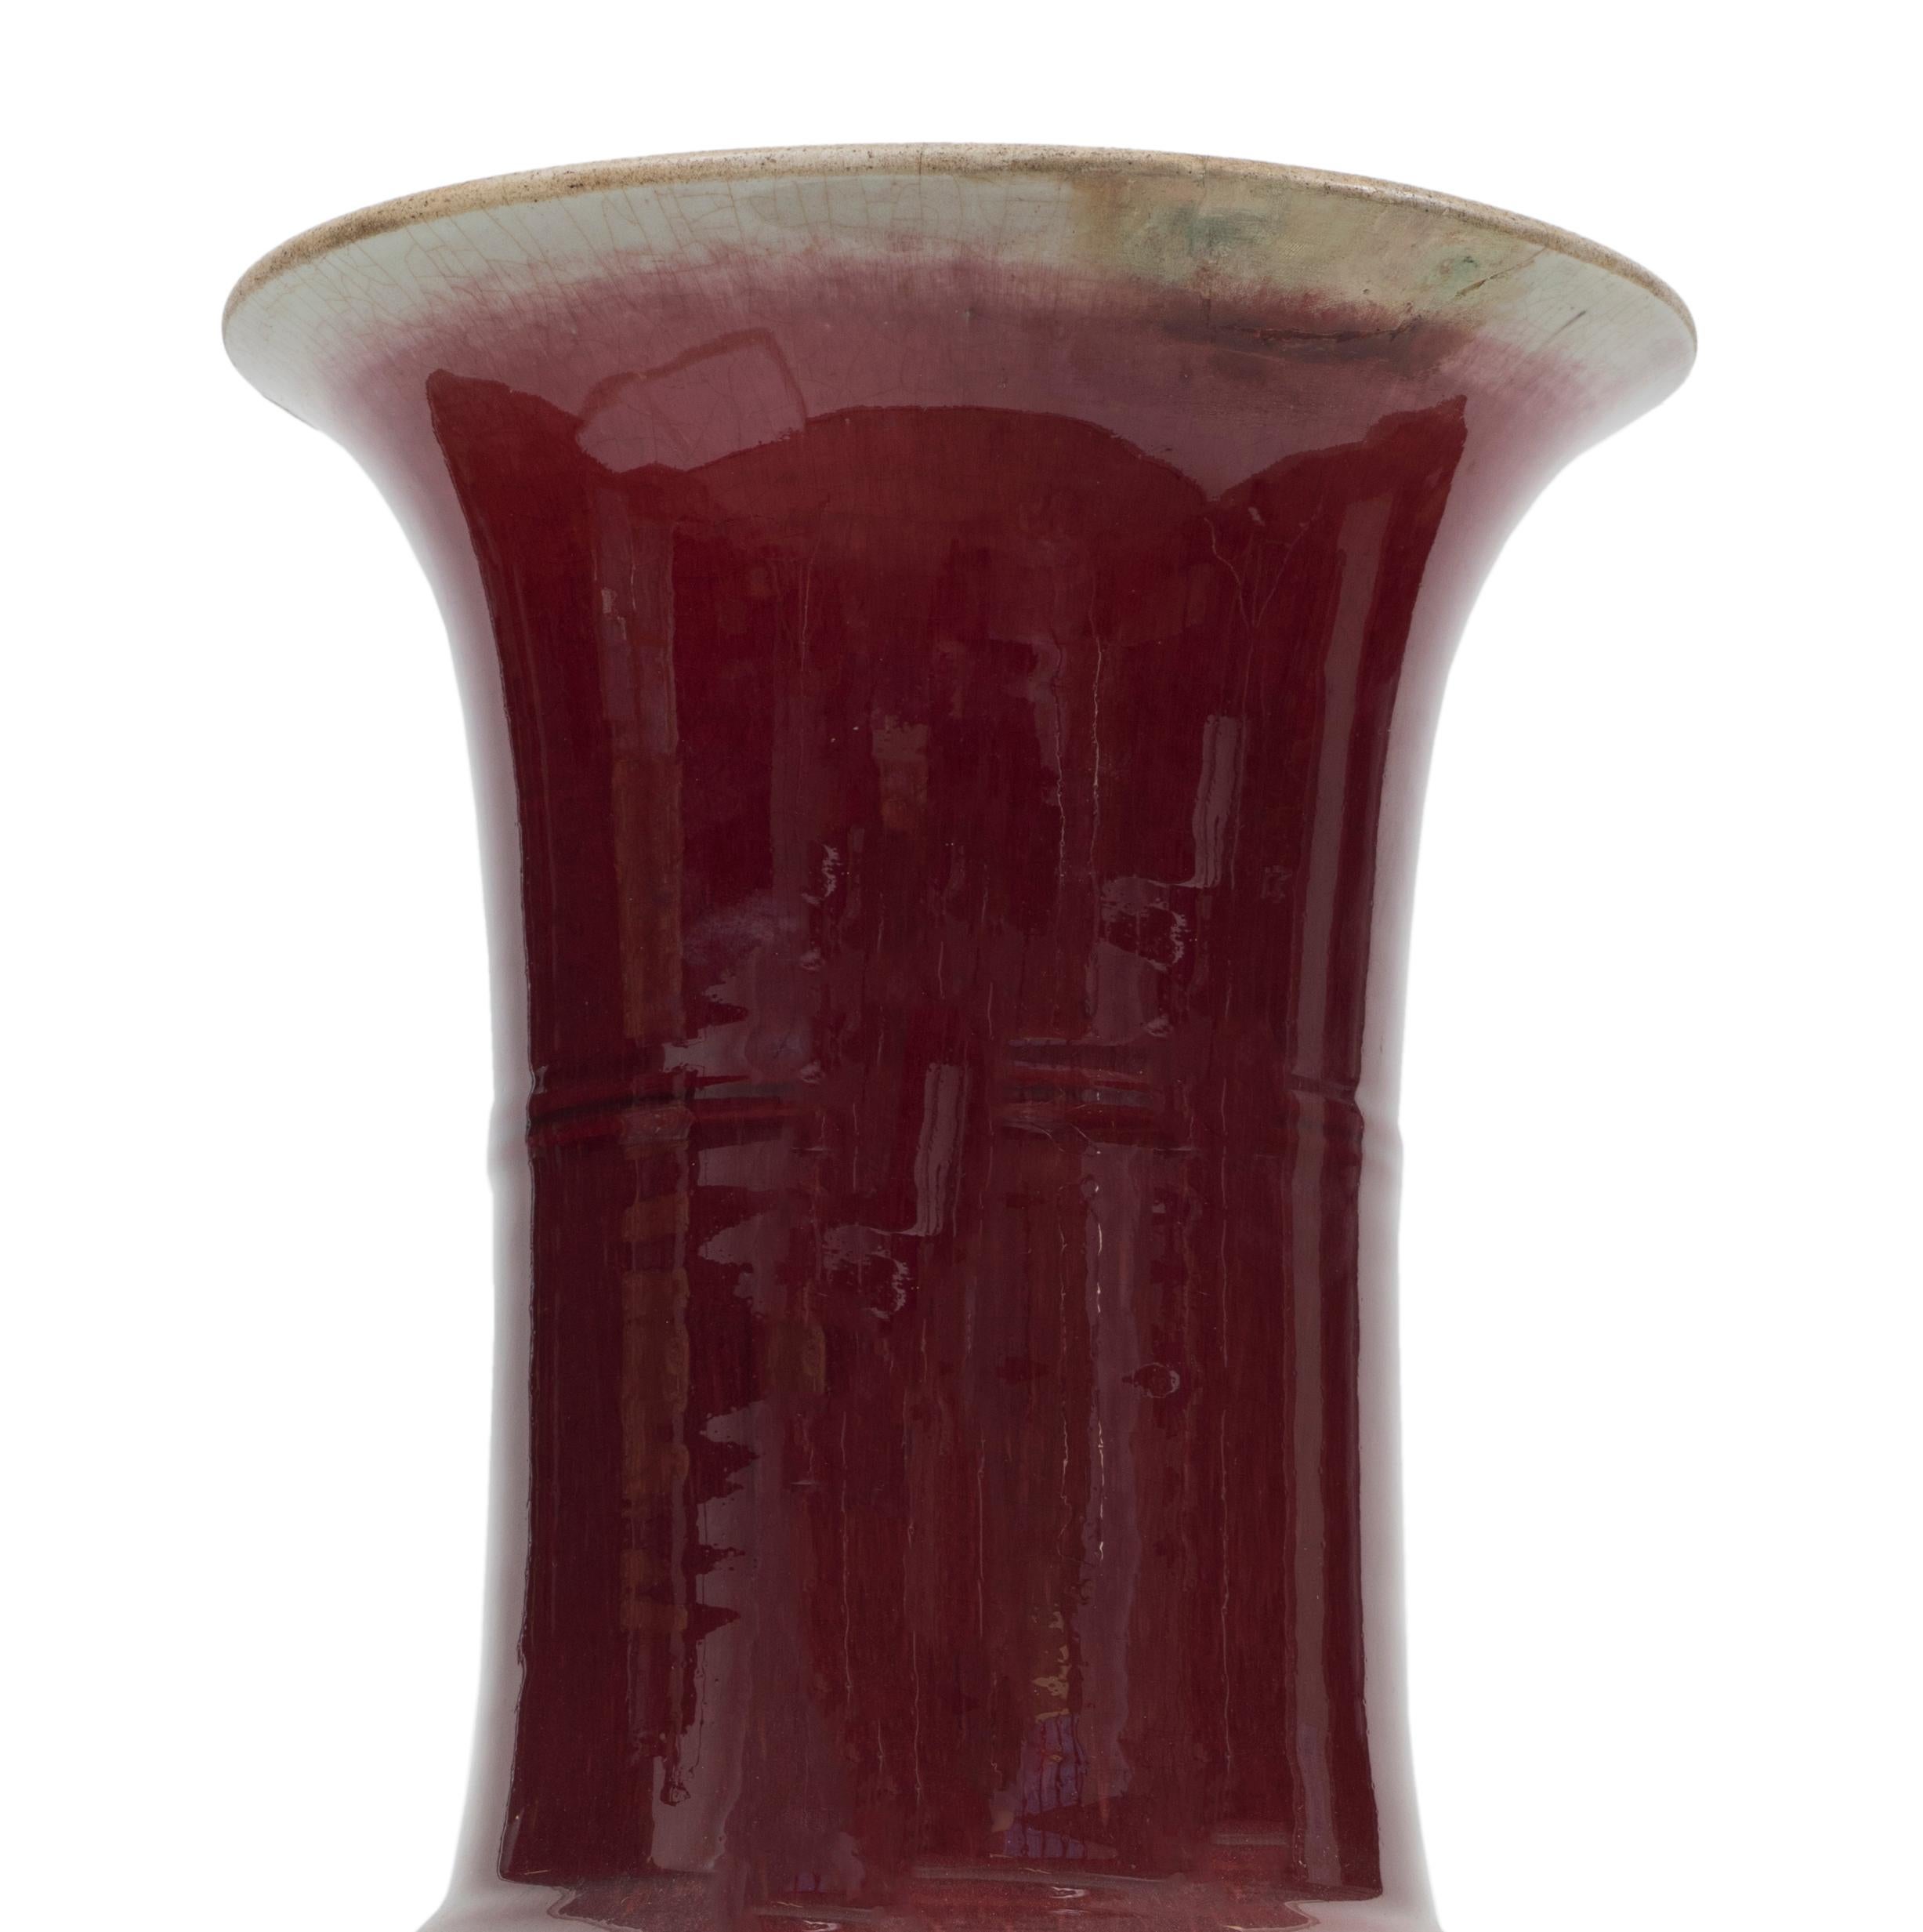 Vintage red ox blood Chinese vase in enameled ceramic with irregular trumpet mouth.
China, Early 20th century.

Good conditions.

This object is shipped from Italy. Under existing legislation, any object in Italy created over 70 years ago by an